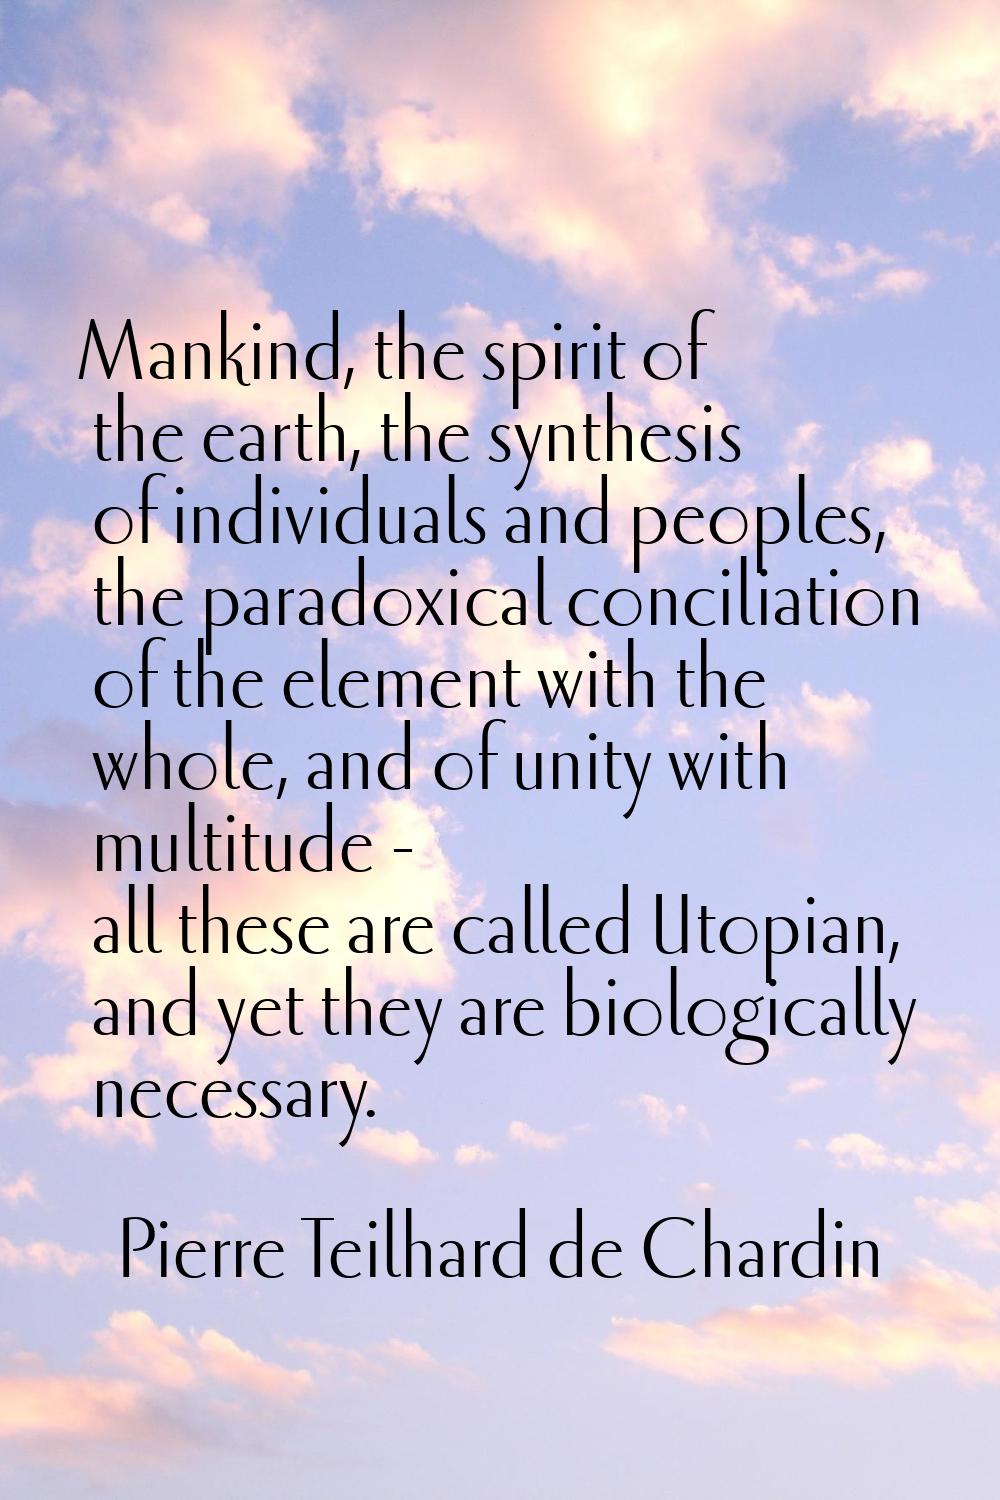 Mankind, the spirit of the earth, the synthesis of individuals and peoples, the paradoxical concili